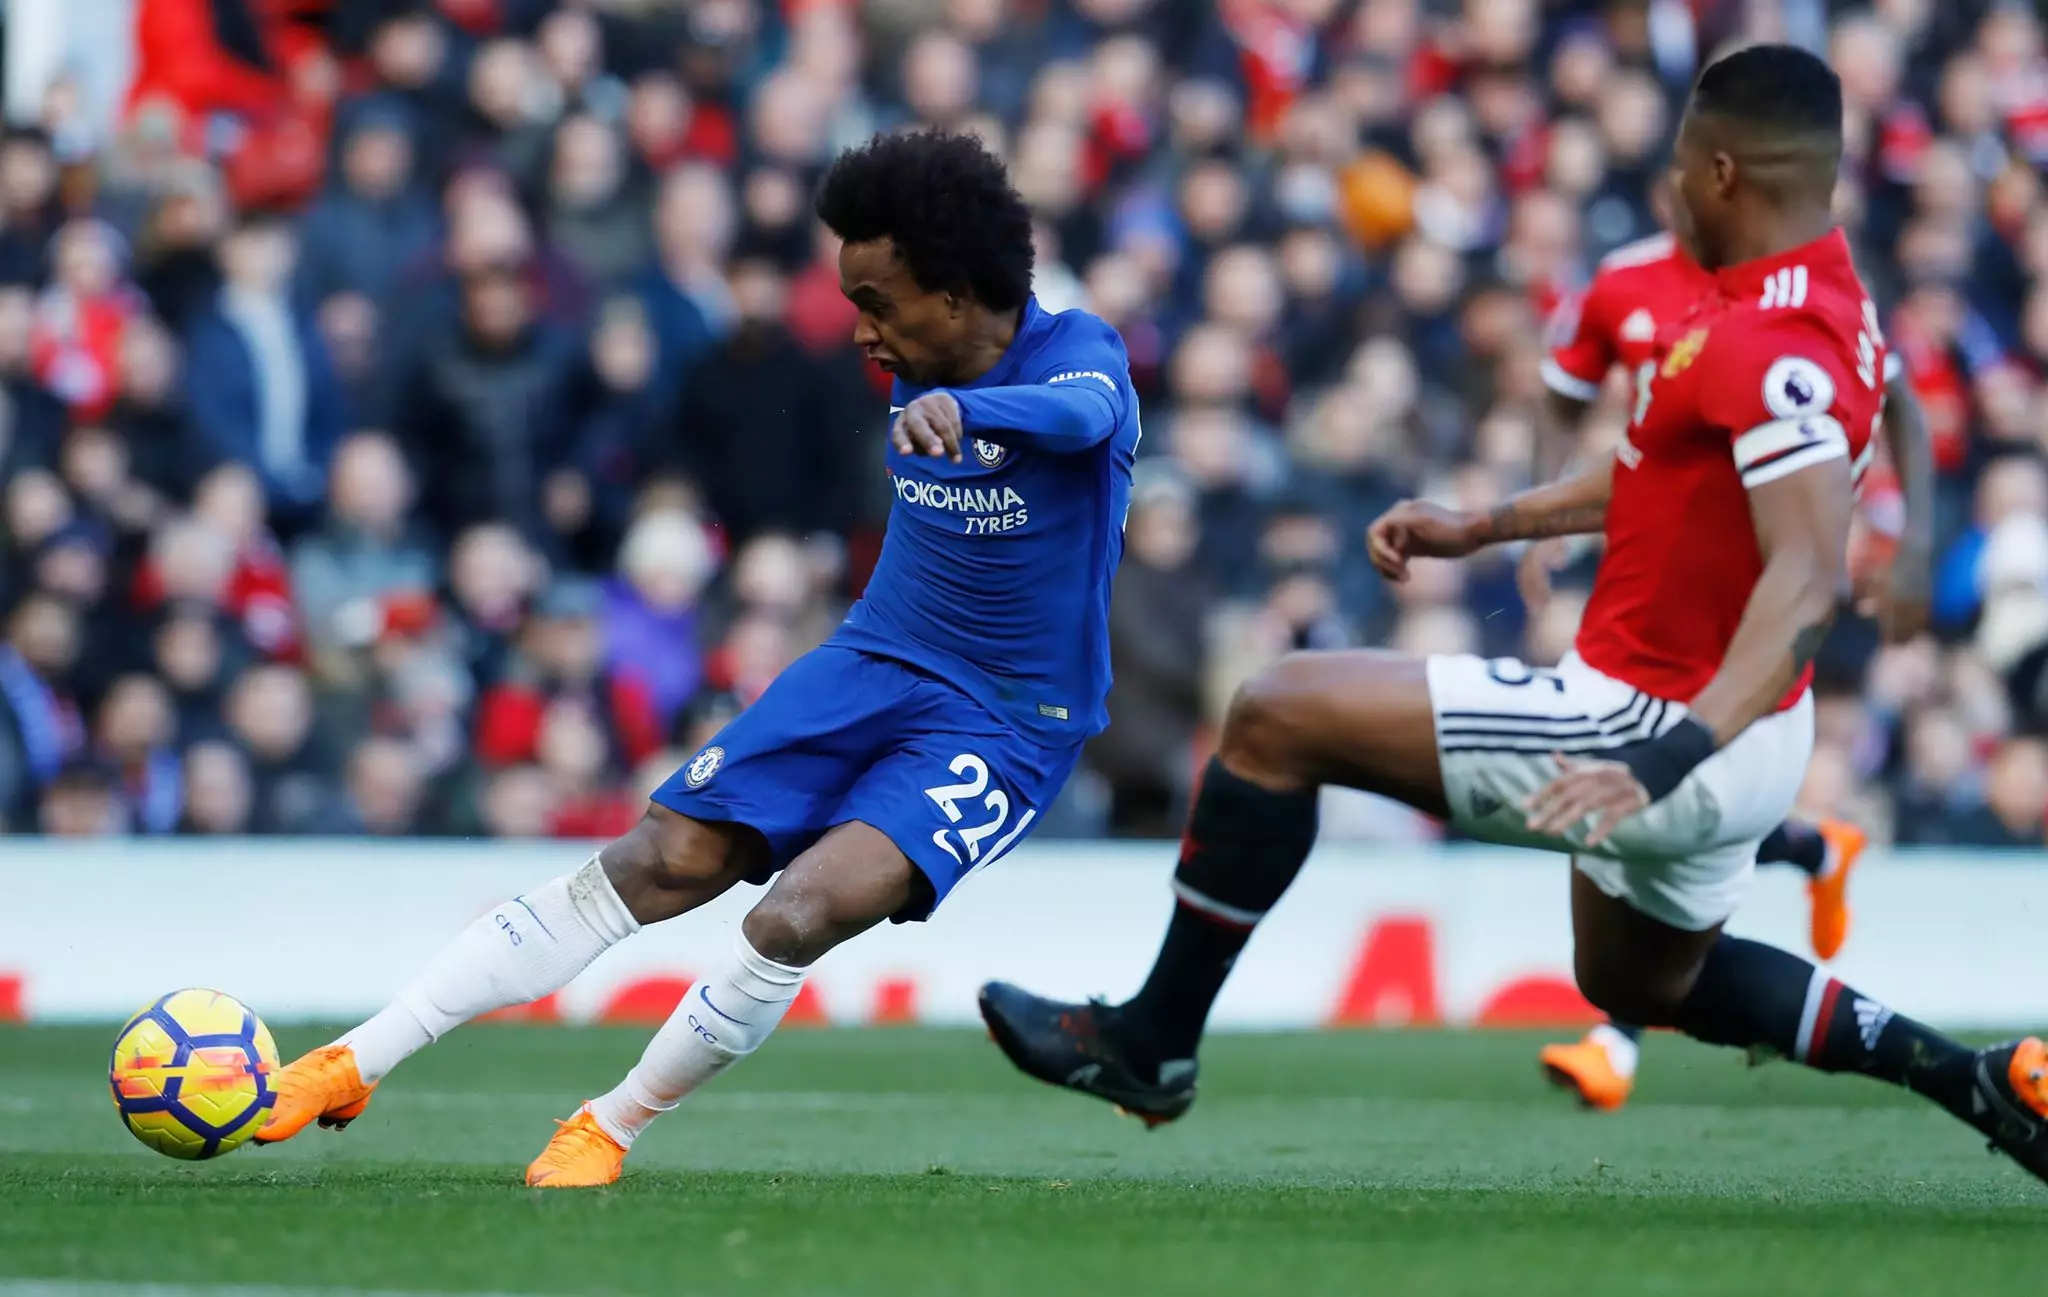 Willian scores a goal against United. Image: PA